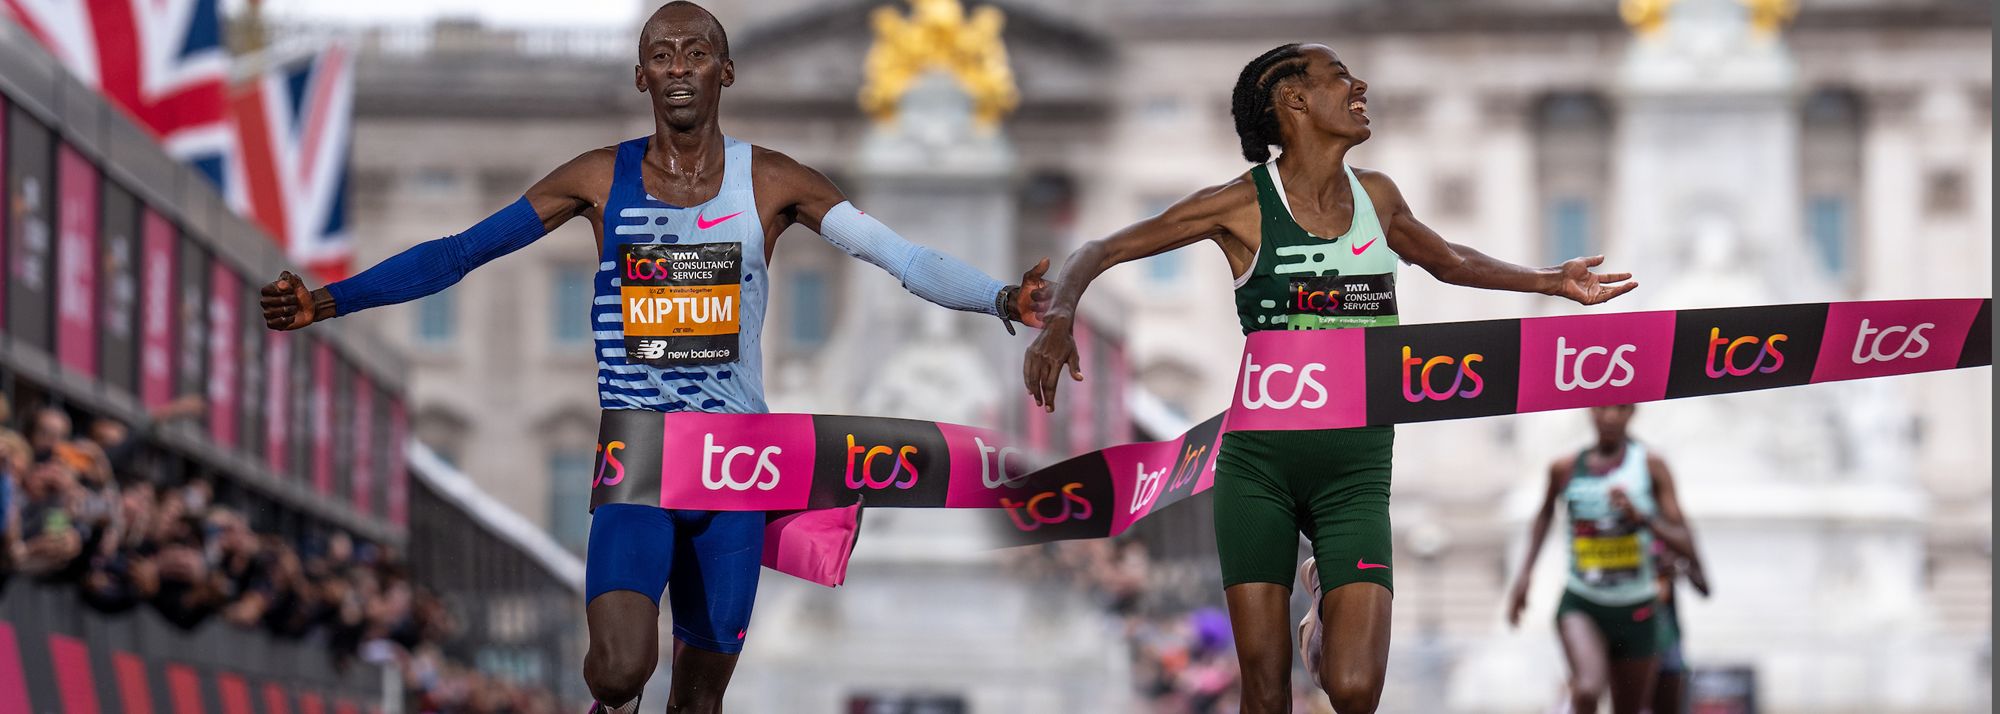 Kelvin Kiptum and Sifan Hassan claim thrilling victories at the TCS London Marathon